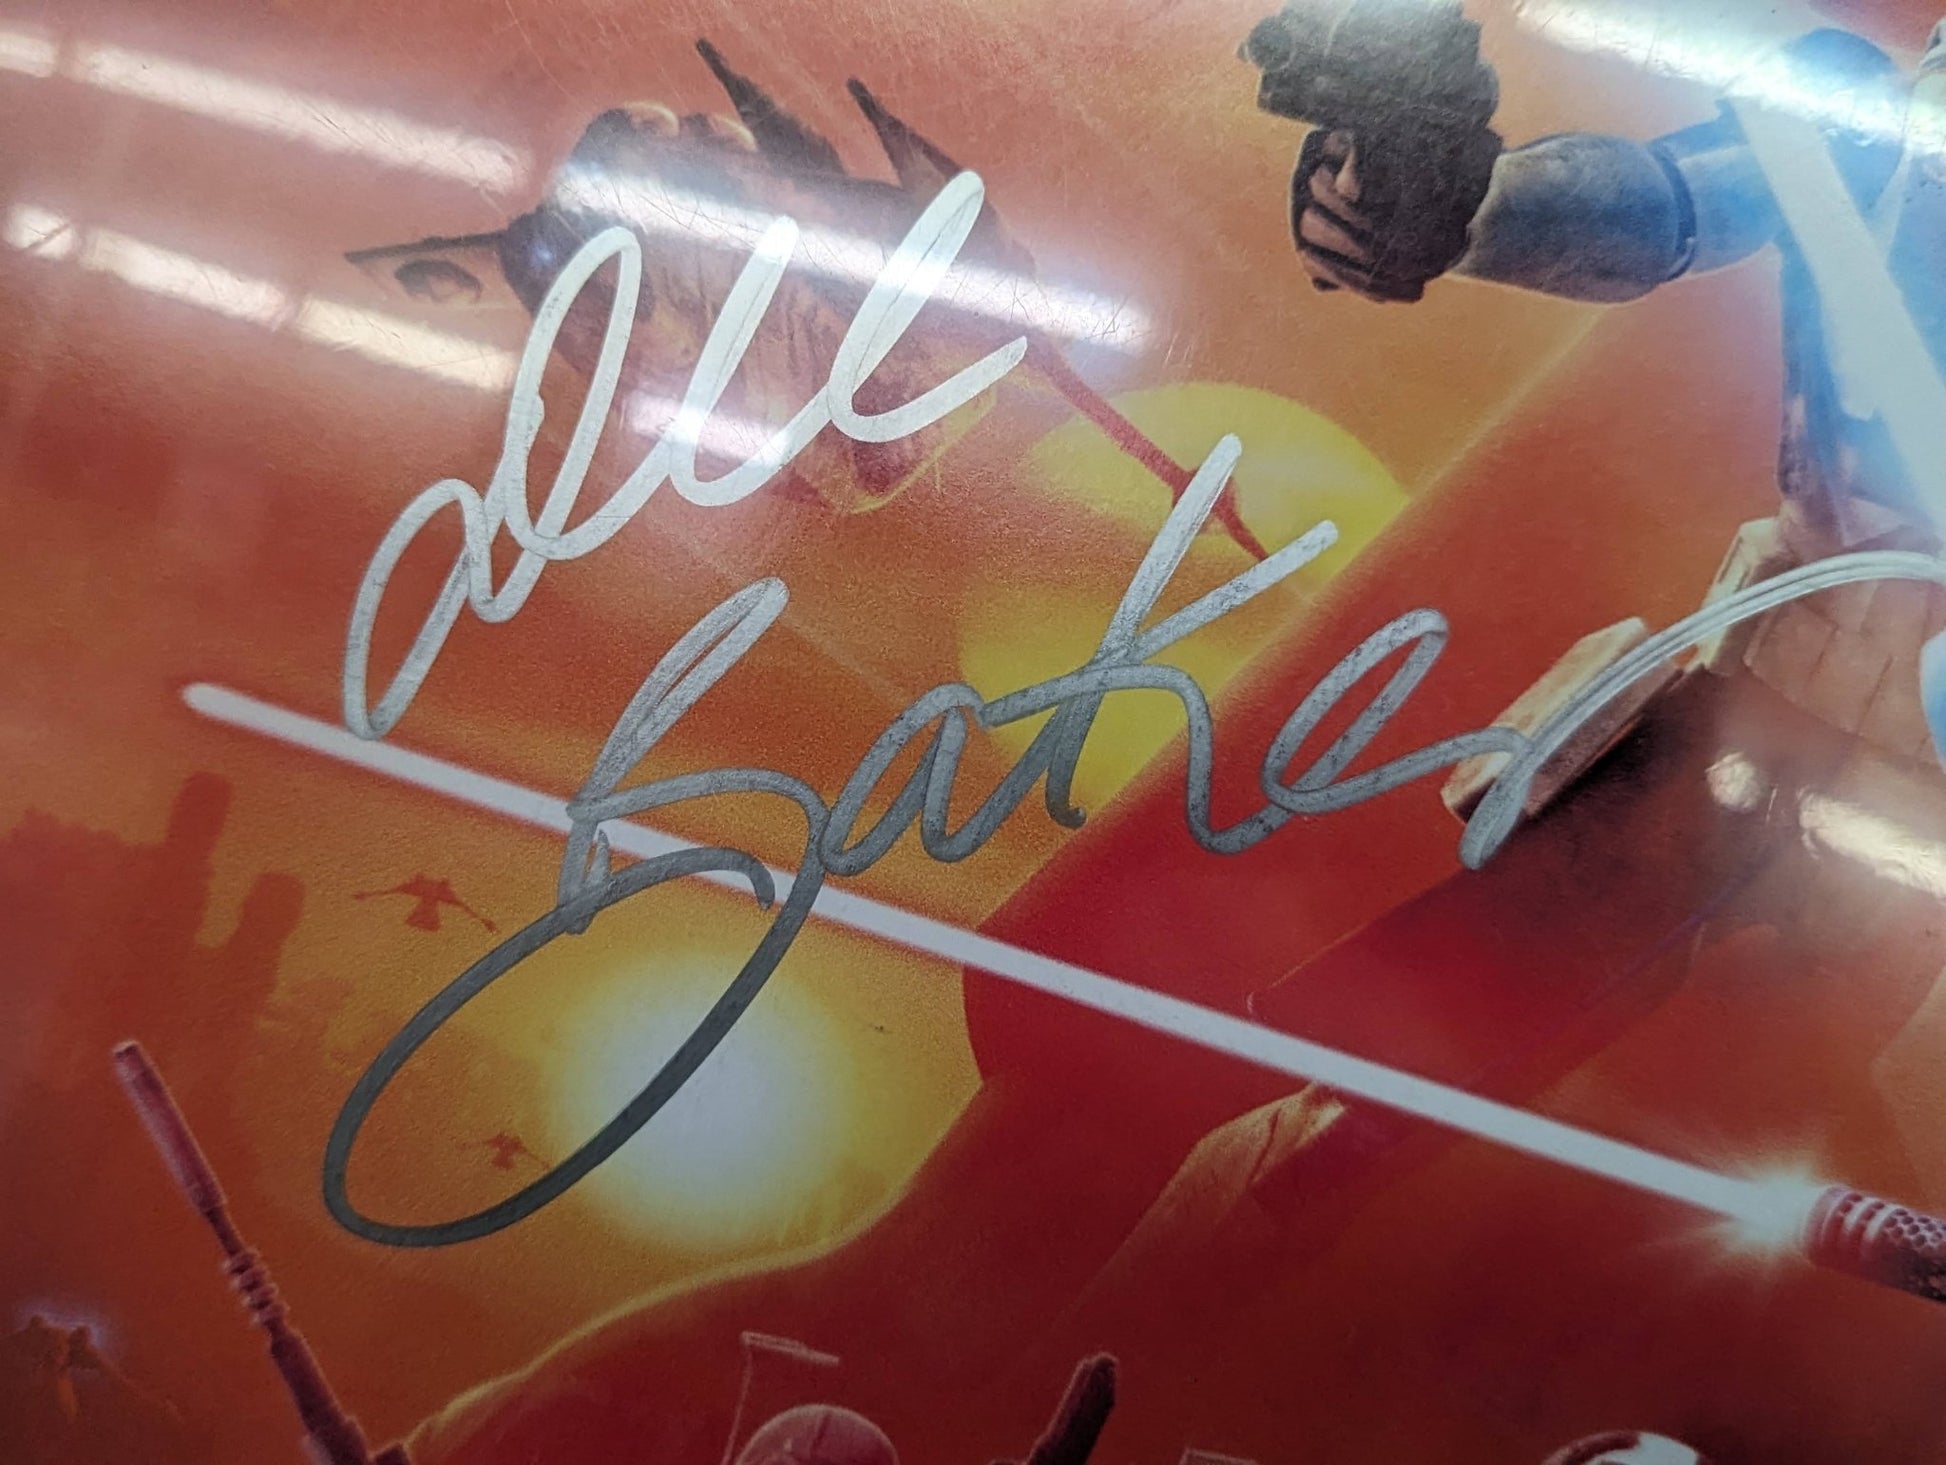 Star Wars: The Clone Wars Cast Signed Poster - Covert Comics and Collectibles